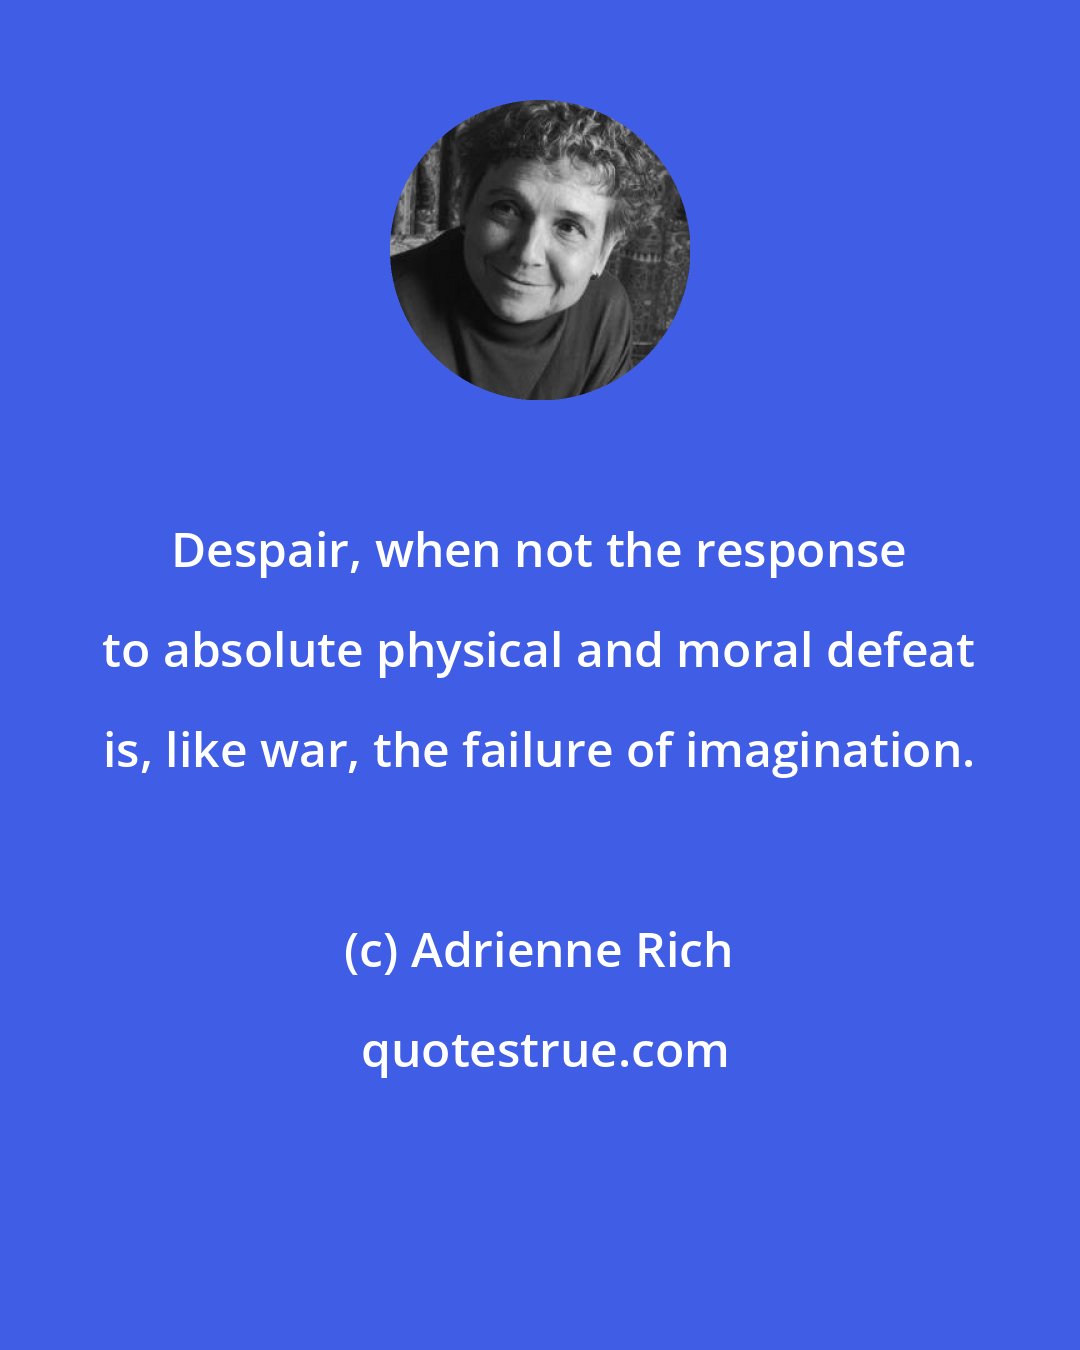 Adrienne Rich: Despair, when not the response to absolute physical and moral defeat is, like war, the failure of imagination.